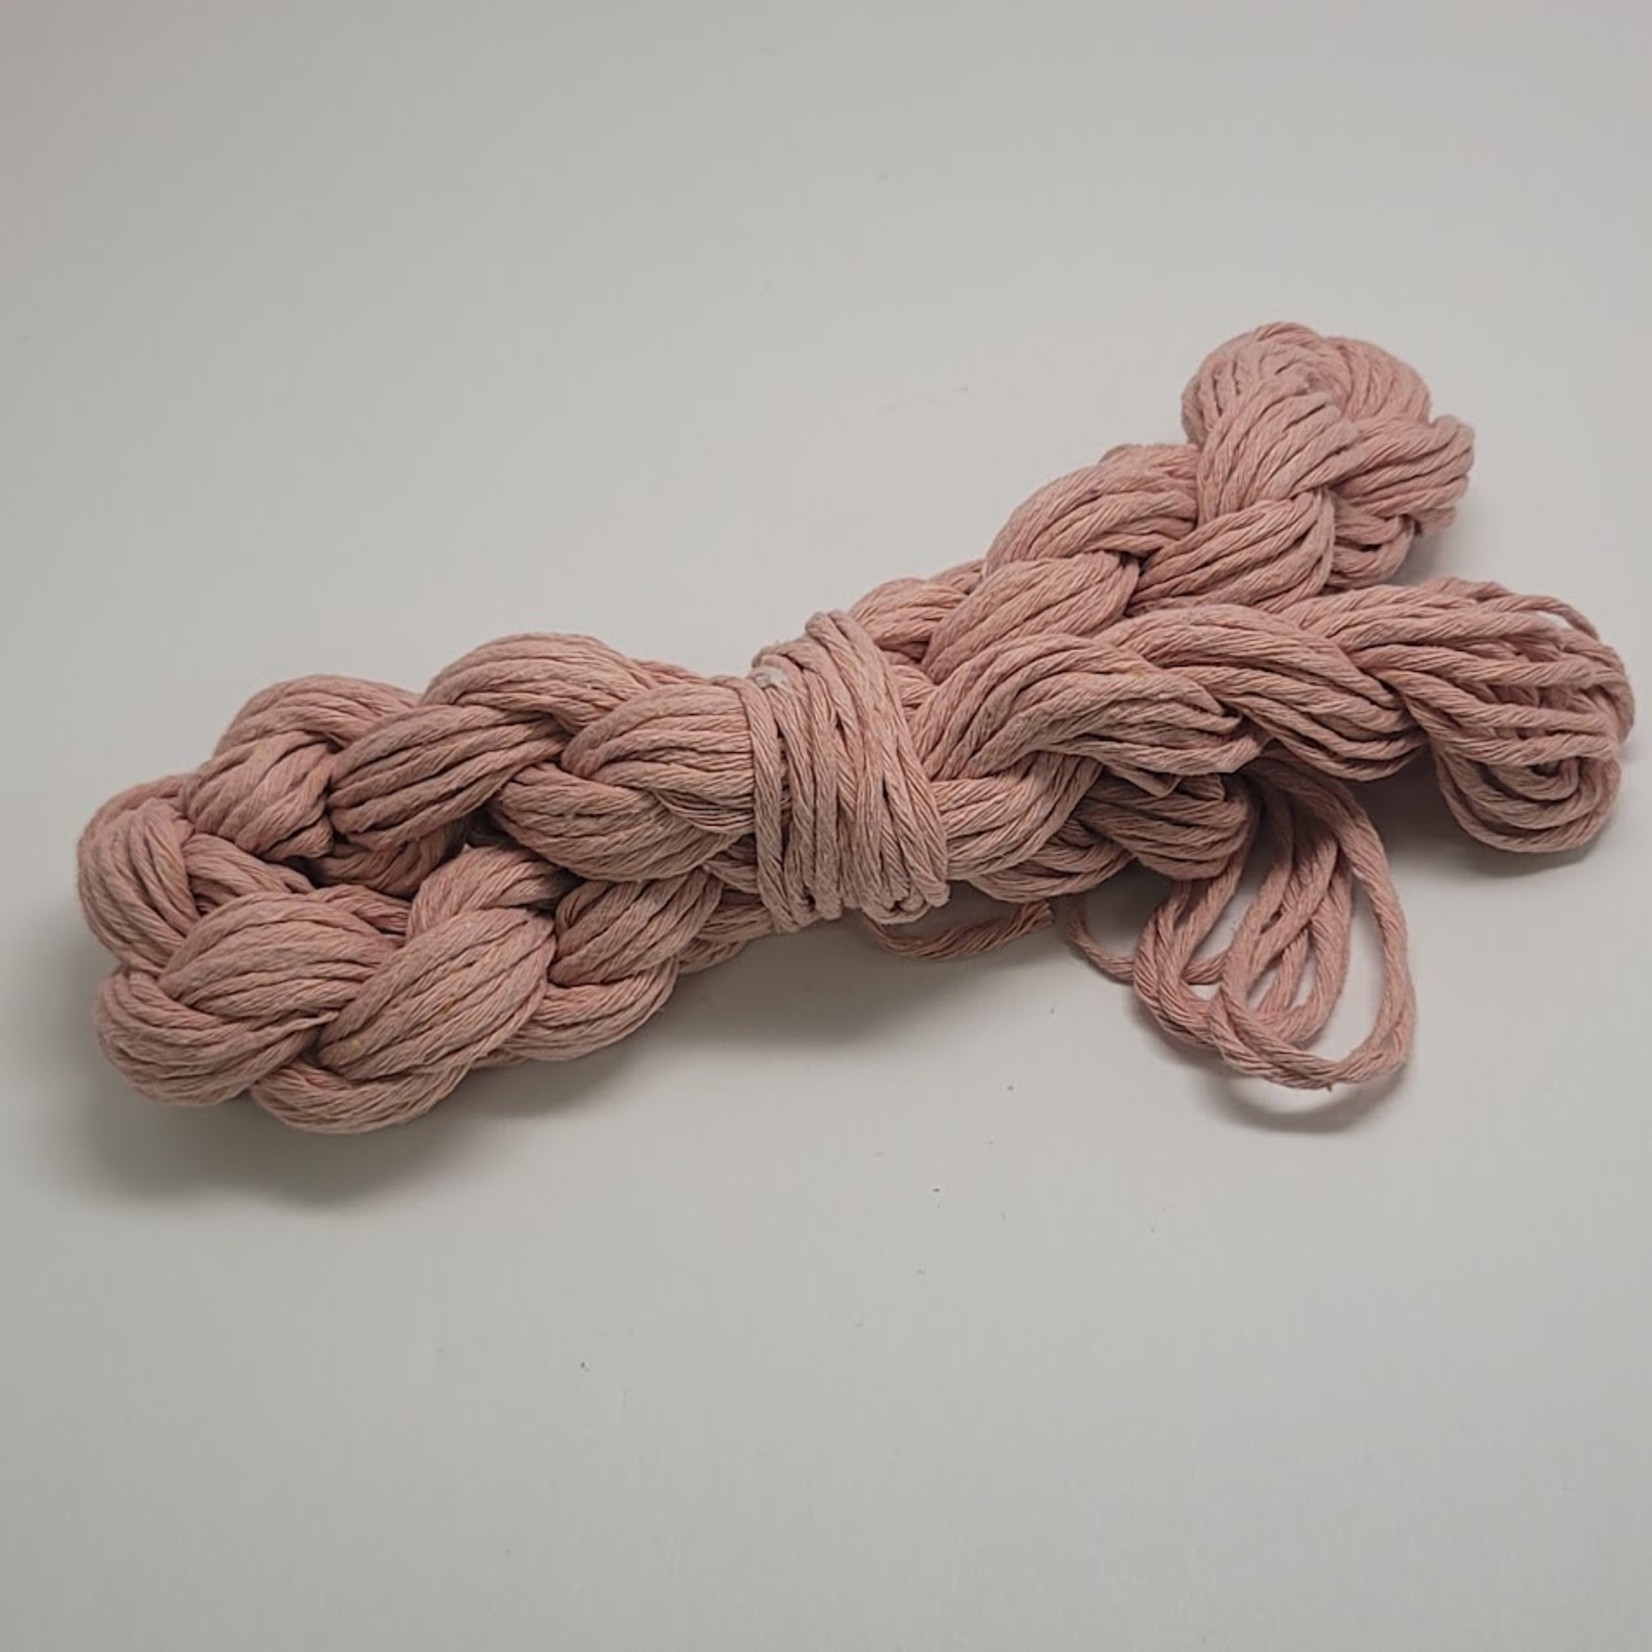 2mm Macrame String - Approx 50m = 164ft - Dusty Rose